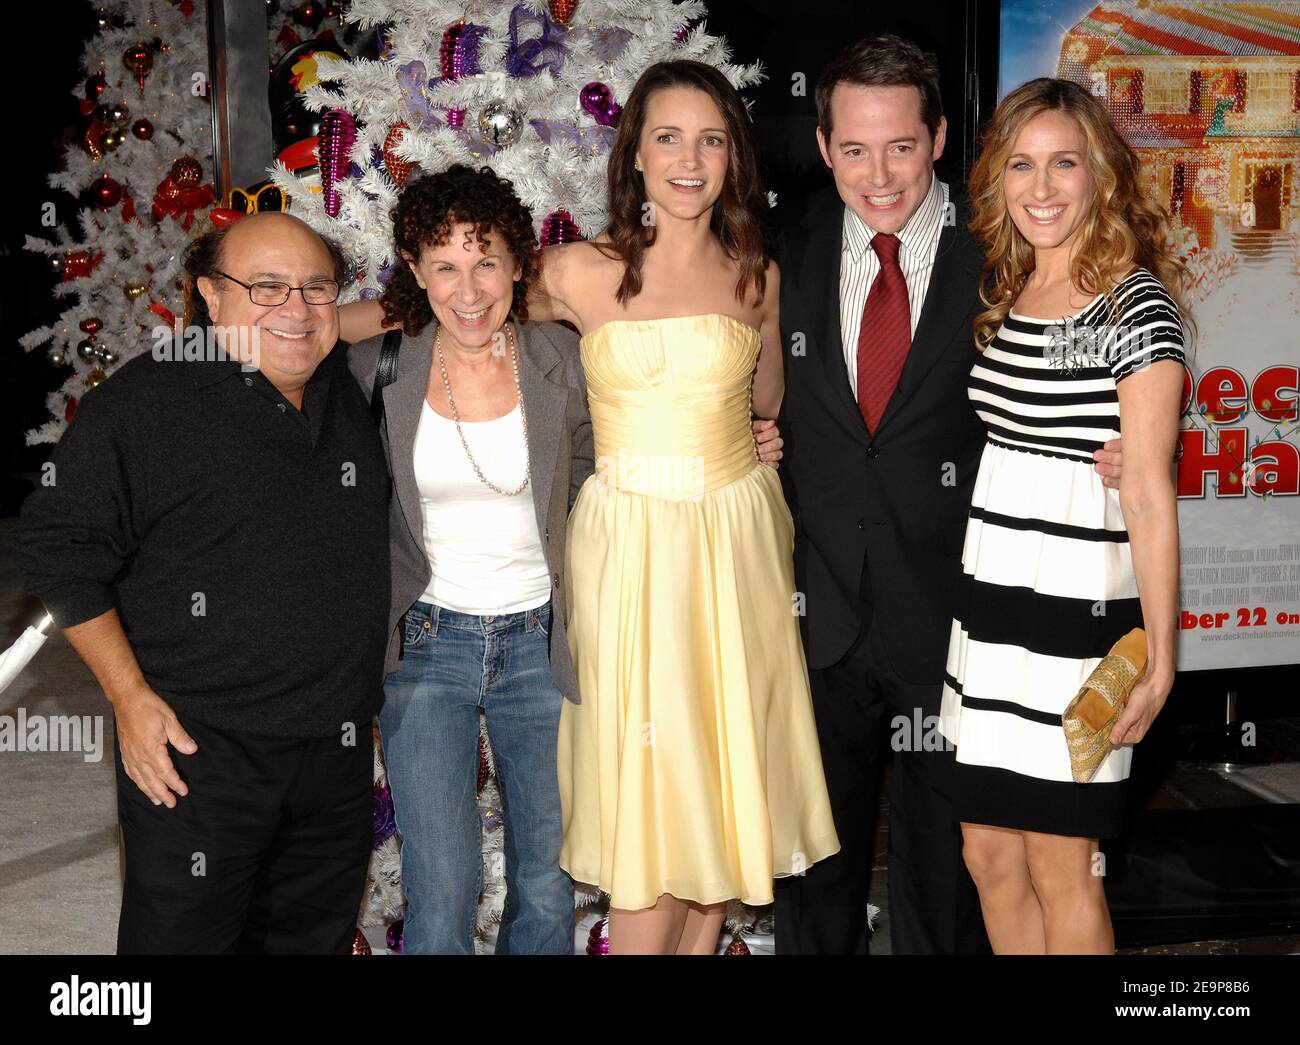 Danny De Vito, Rhea Perlman, Kristin Davis, Matthew Broderick and Sarah Jessica Parker attend the premiere of 20th Century Fox 'Deck the Halls' at the Chinese Theatre in Hollywood. Los Angeles, November 12, 2006. Photo by Lionel Hahn/ABACAPRESS.COM Stock Photo